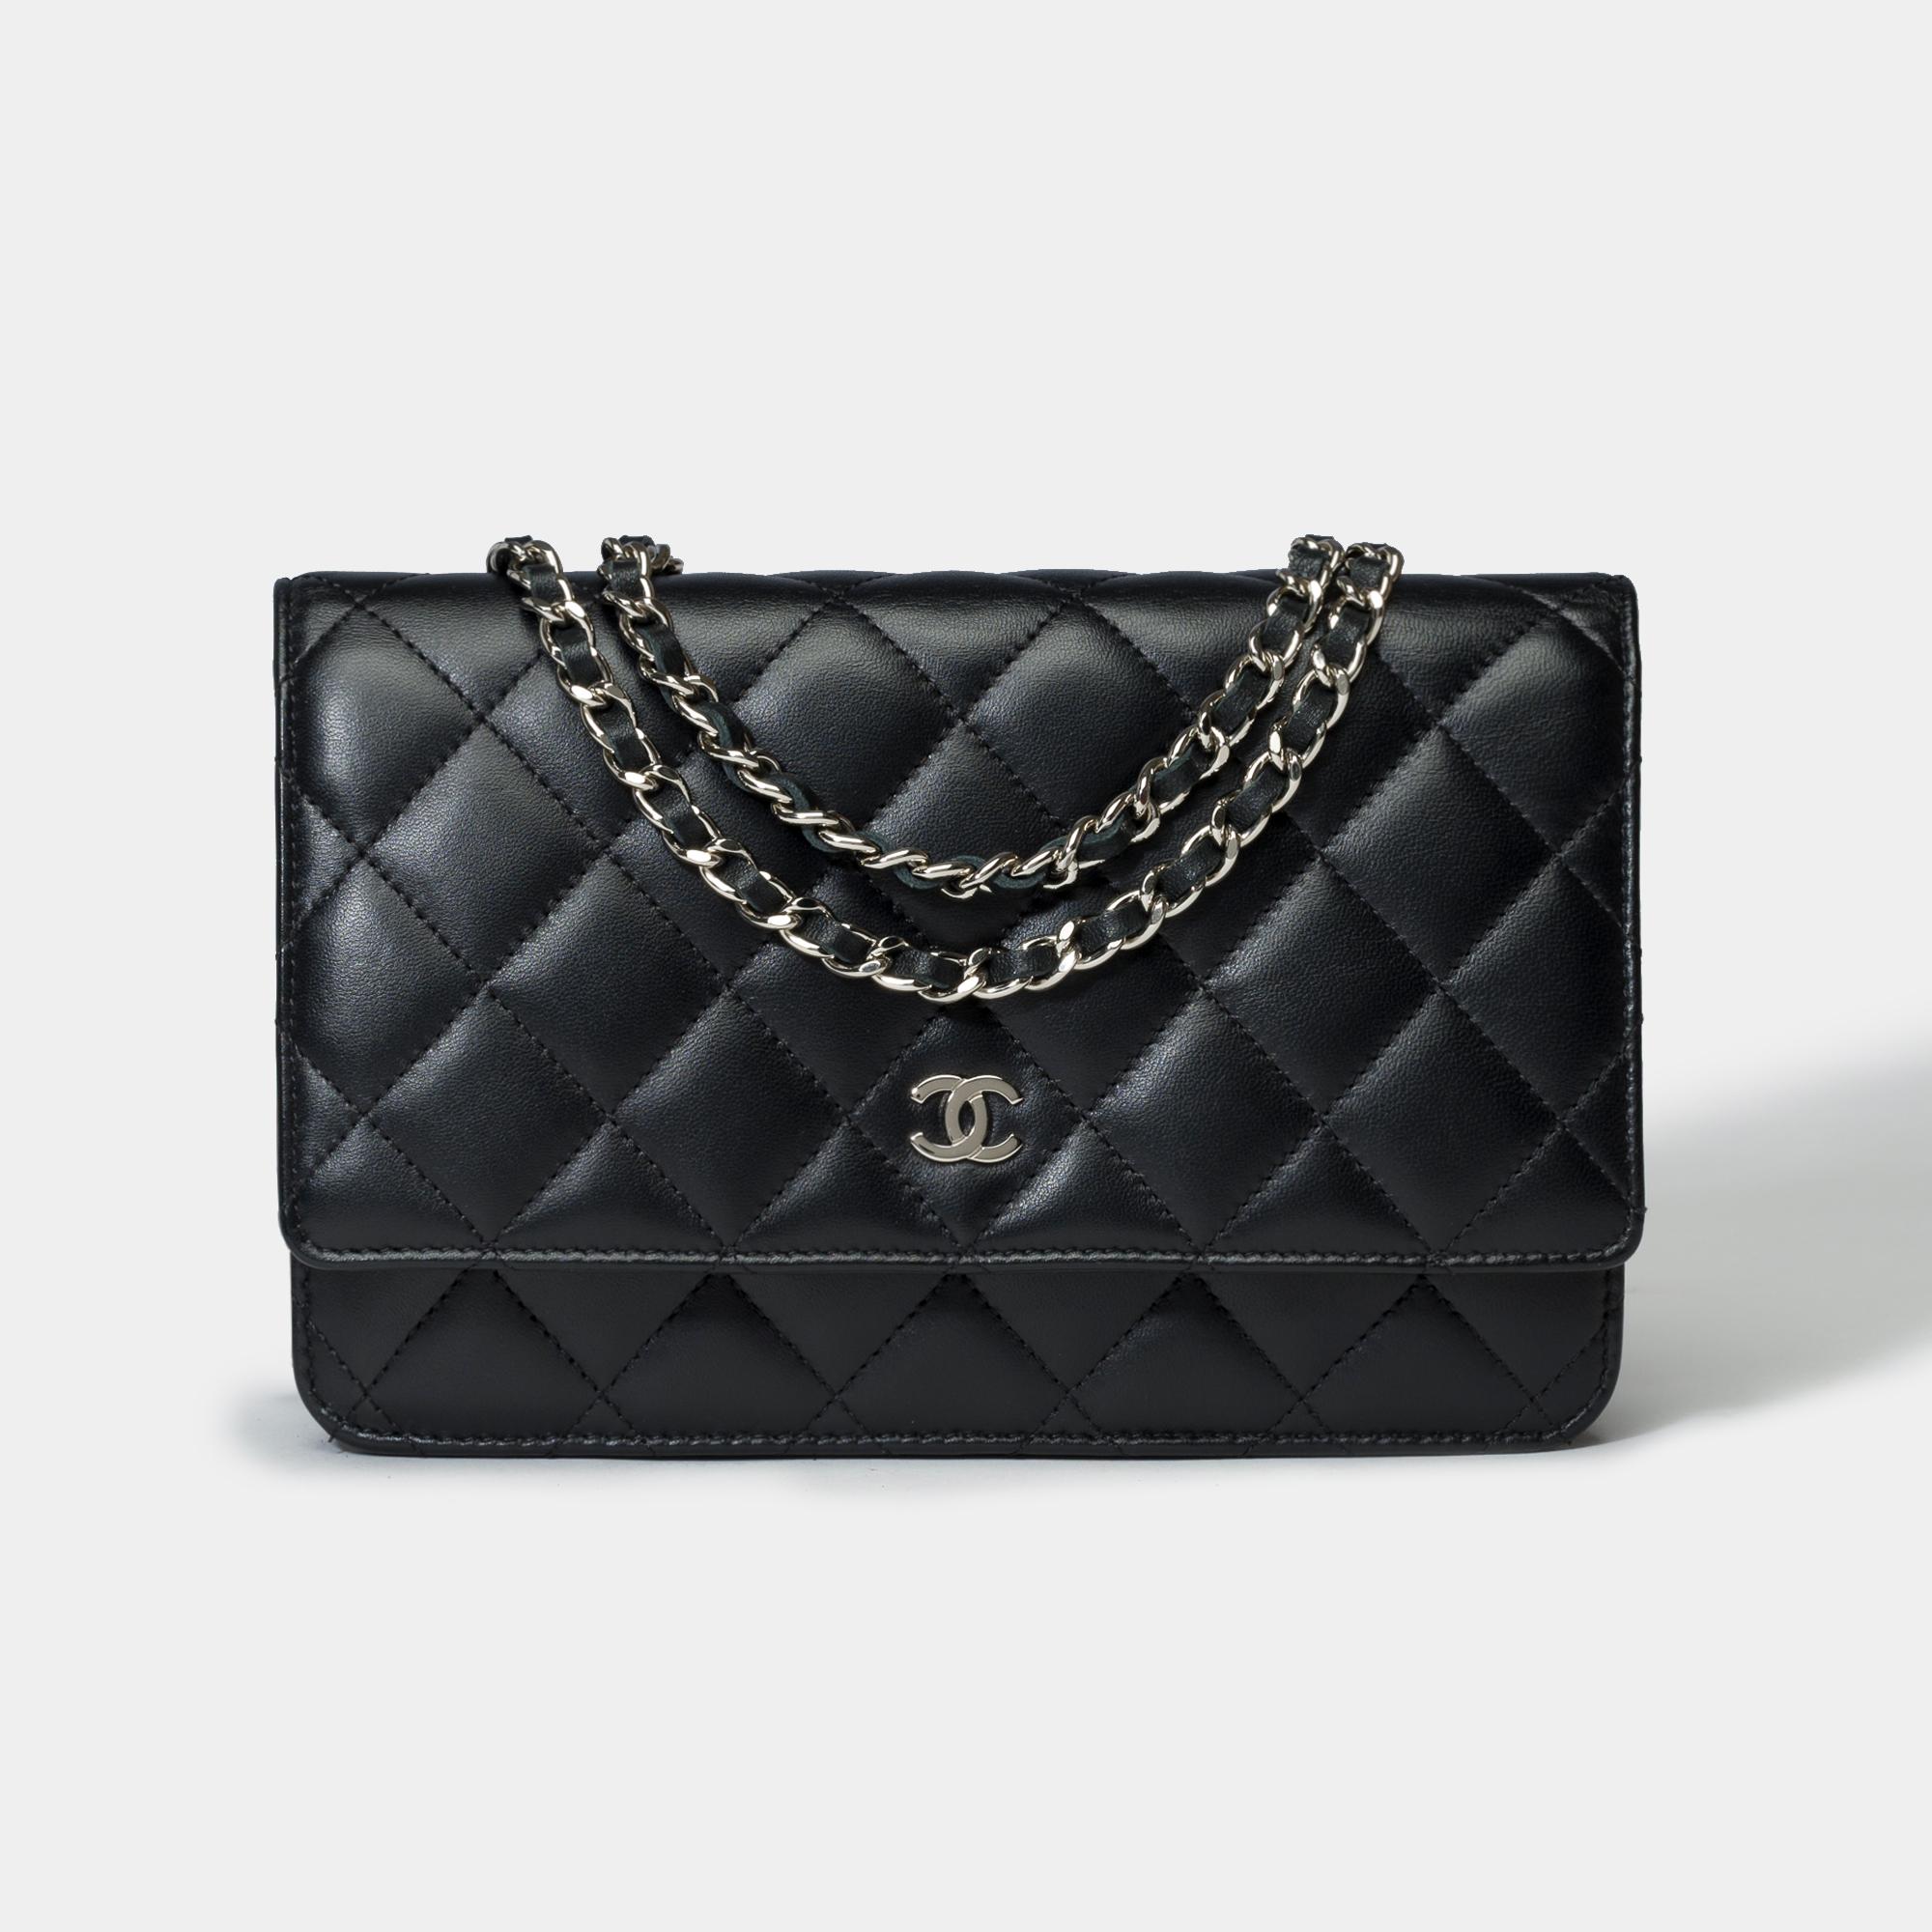 Gorgeous​ ​Chanel​ ​Wallet​ ​On​ ​Chain​ ​shoulder​ ​bag​ ​(WOC)​ ​in​ ​black​ ​quilted​ ​lambskin,​ ​silver​ ​metal​ ​trim,​ ​a​ ​silver​ ​metal​ ​chain​ ​interlaced​ ​with​ ​black​ ​leather​ ​allowing​ ​a​ ​shoulder​ ​or​ ​crossbody​ ​carry

A​